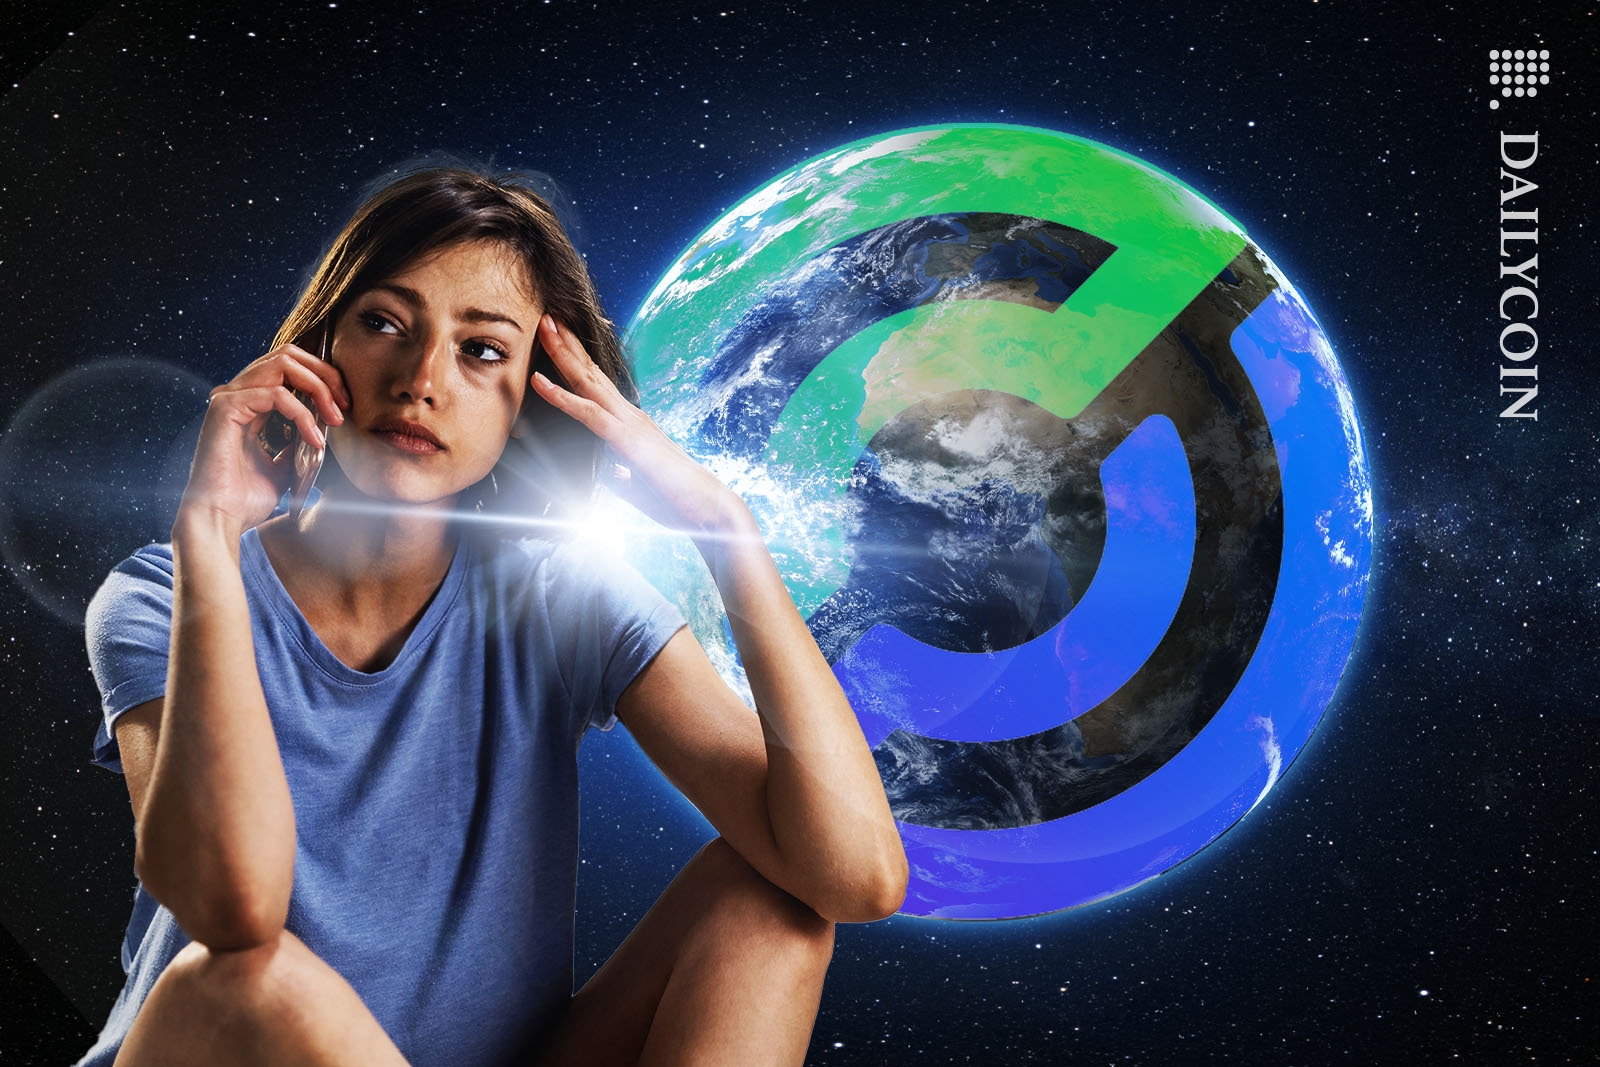 Woman about to cry whilst on the phone receiving bad news, in front of planet earth disguised as a circle logo.